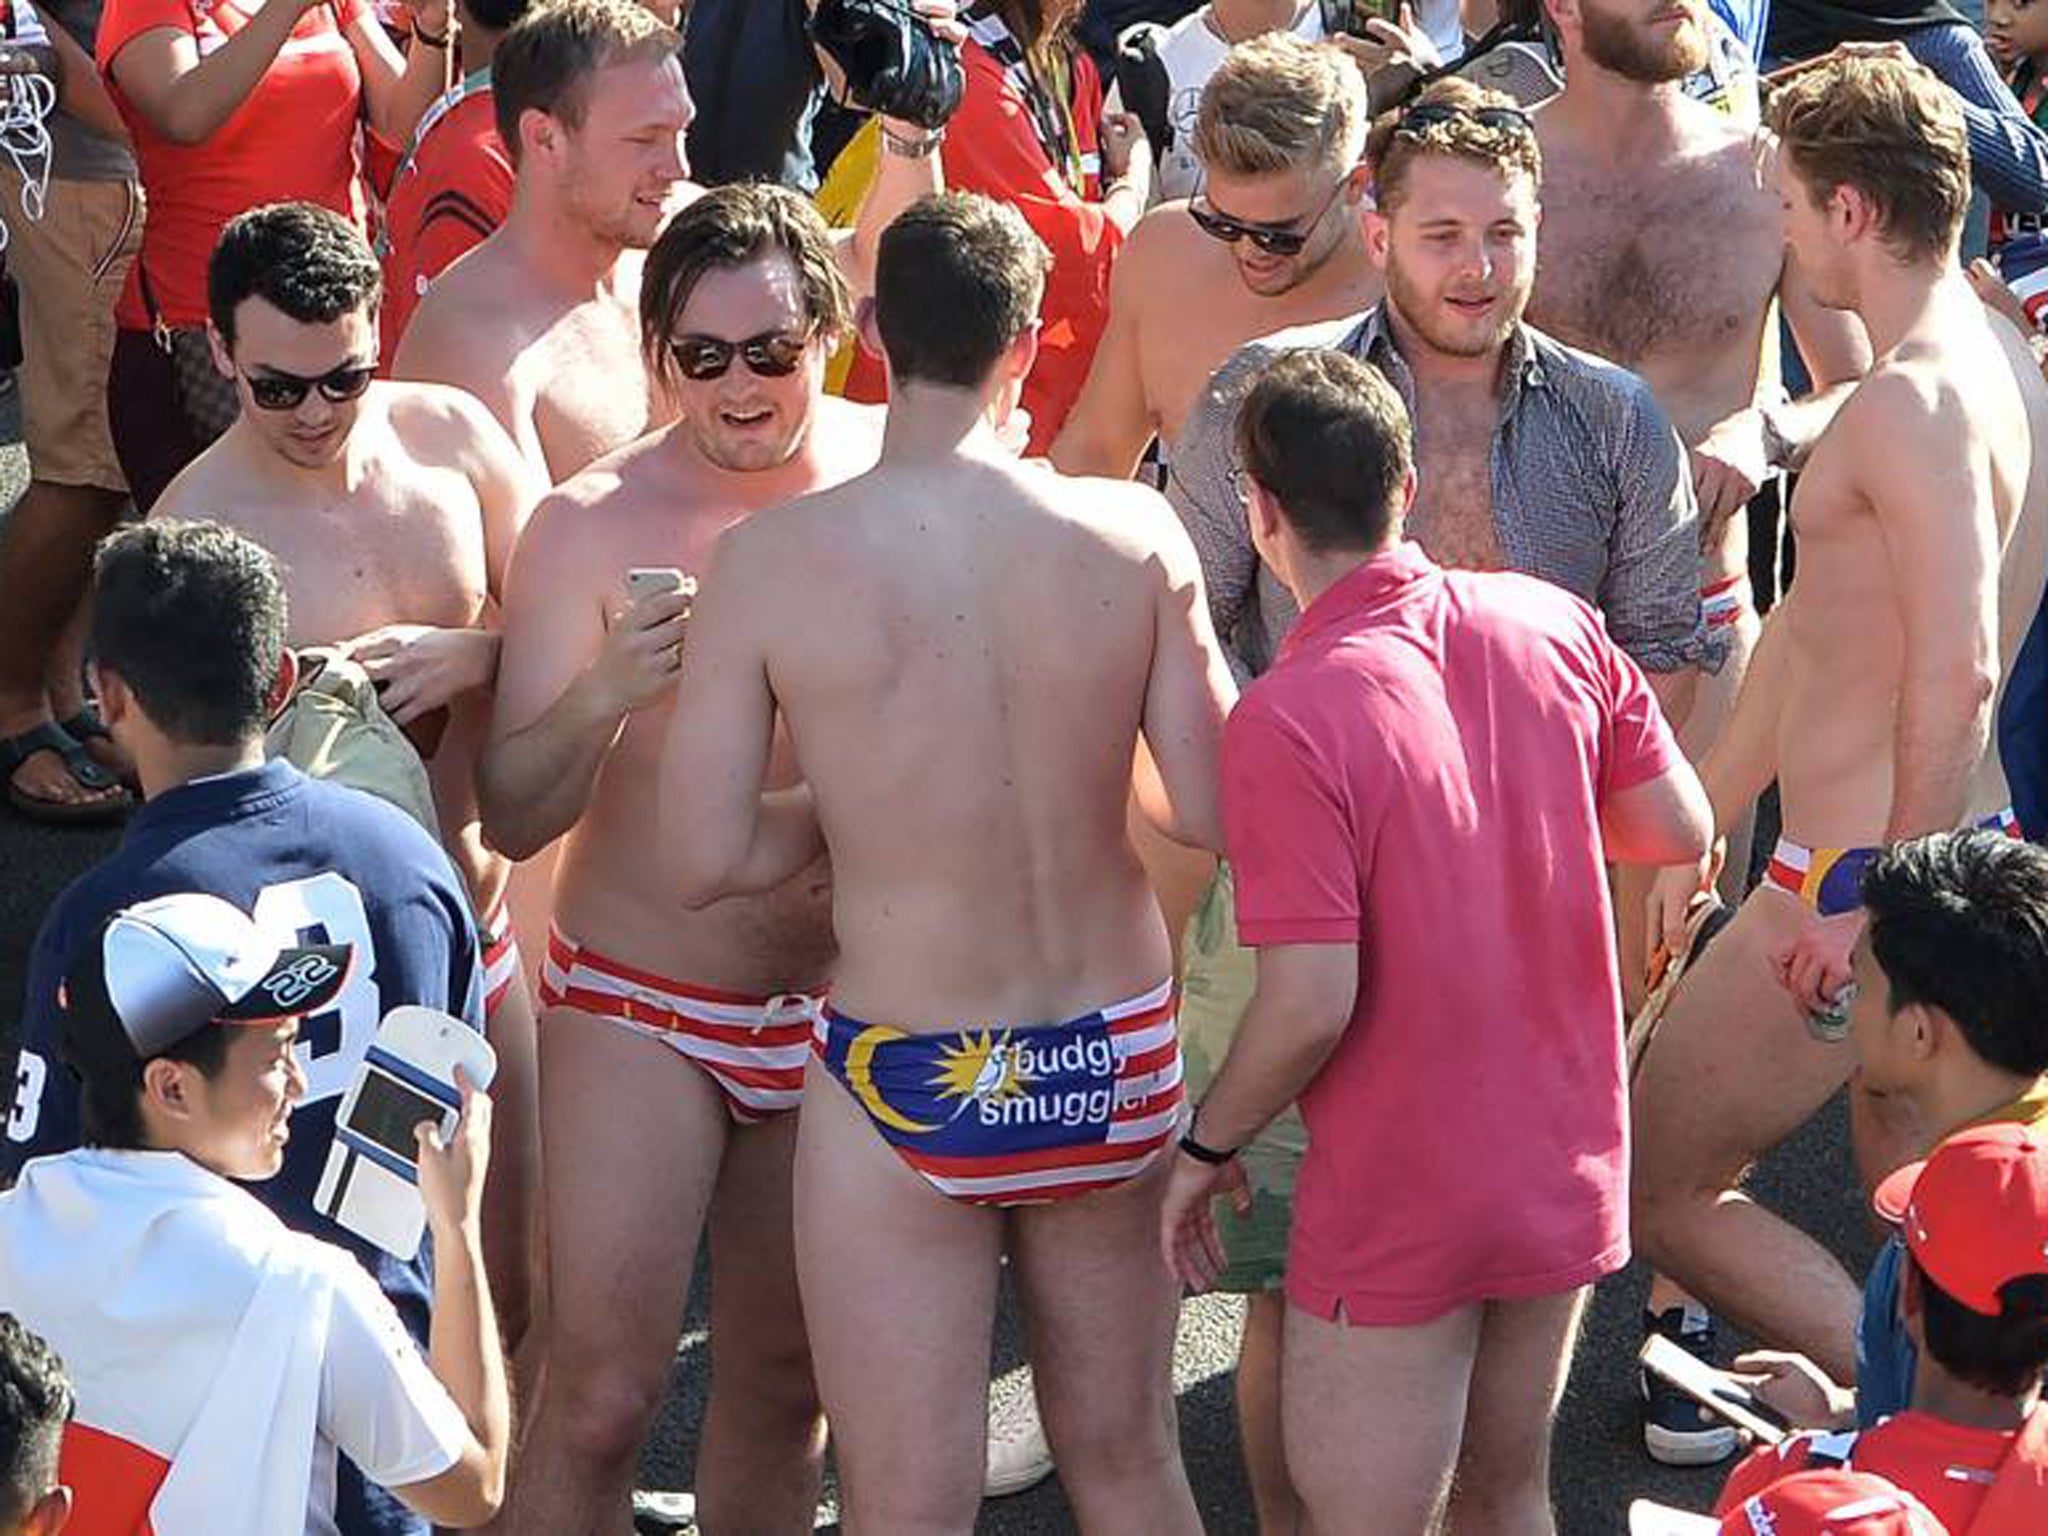 Nine Australians detained over 'premeditated' Budgy Smuggler display at  Malaysian Grand Prix, The Independent